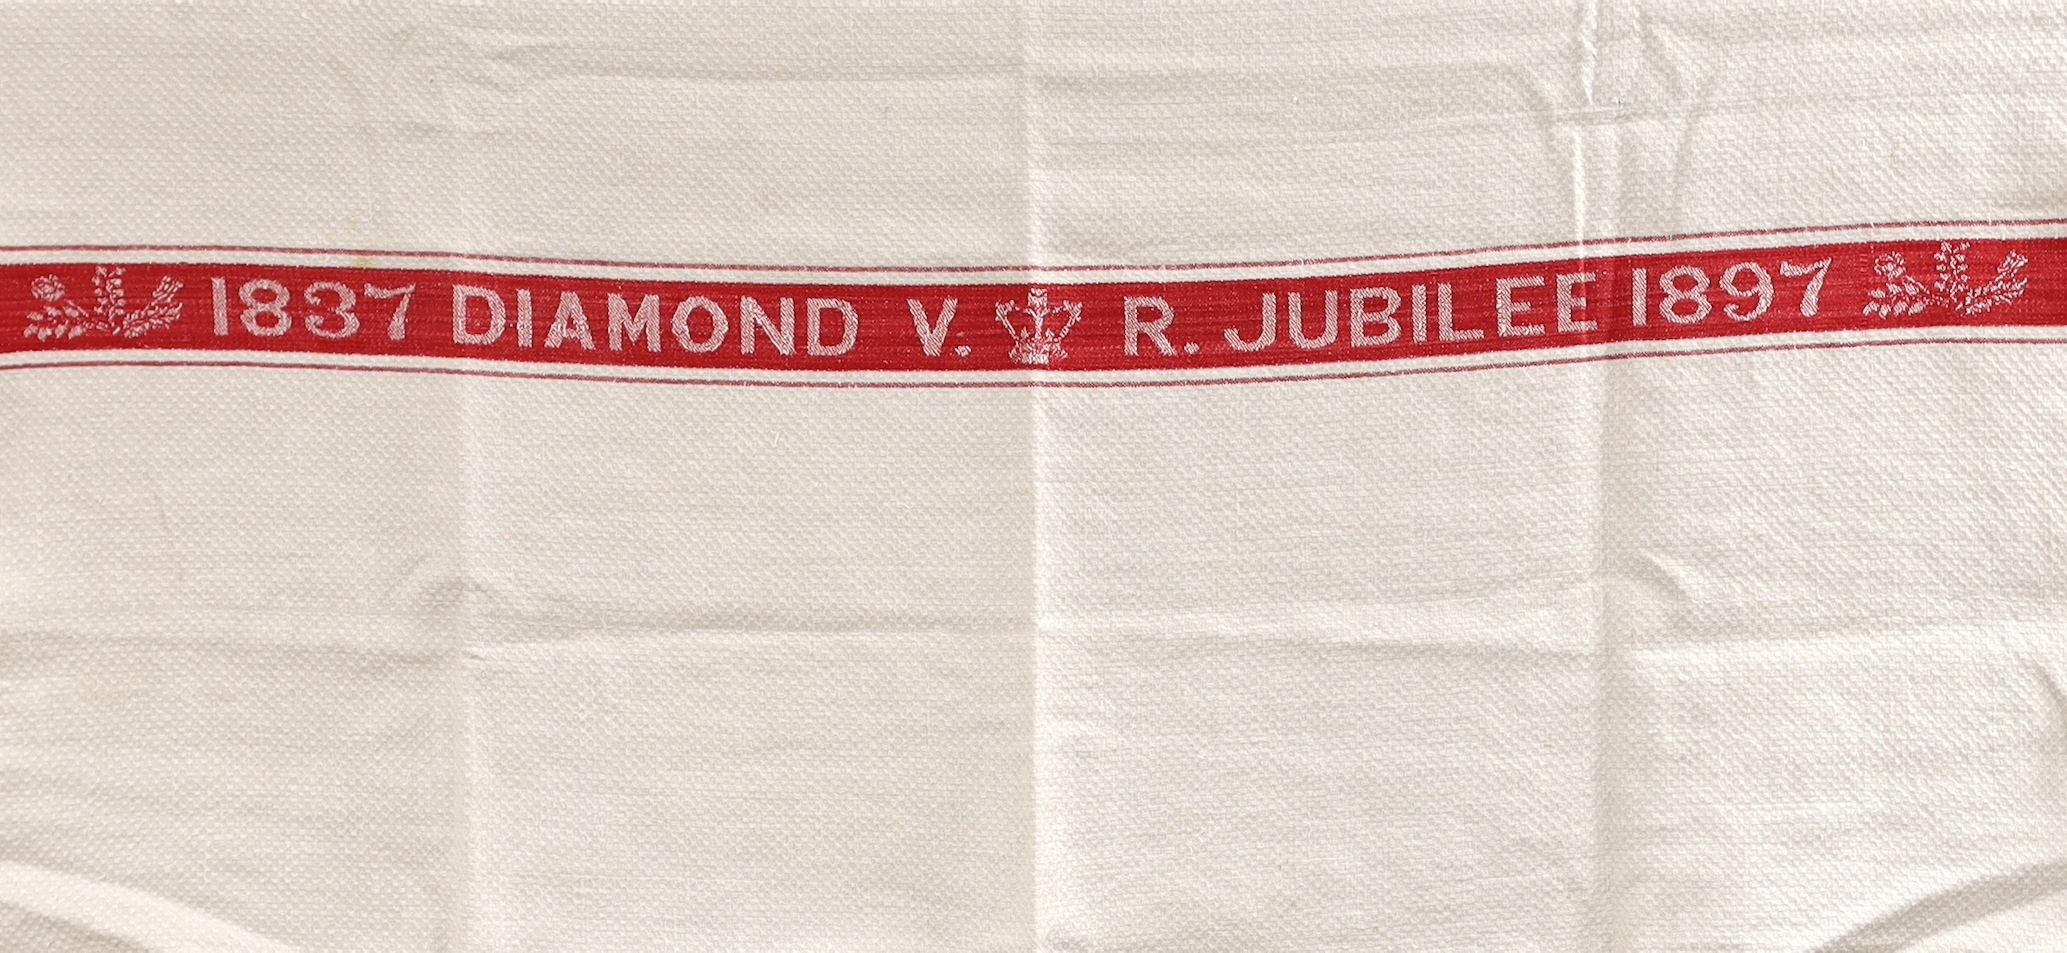 An unusual Victorian jubilee damask hand towel, 1897, and a lace stole, lace trimming and a pair of chamois leather gloves, hand towel 94cm long x 61cm wide